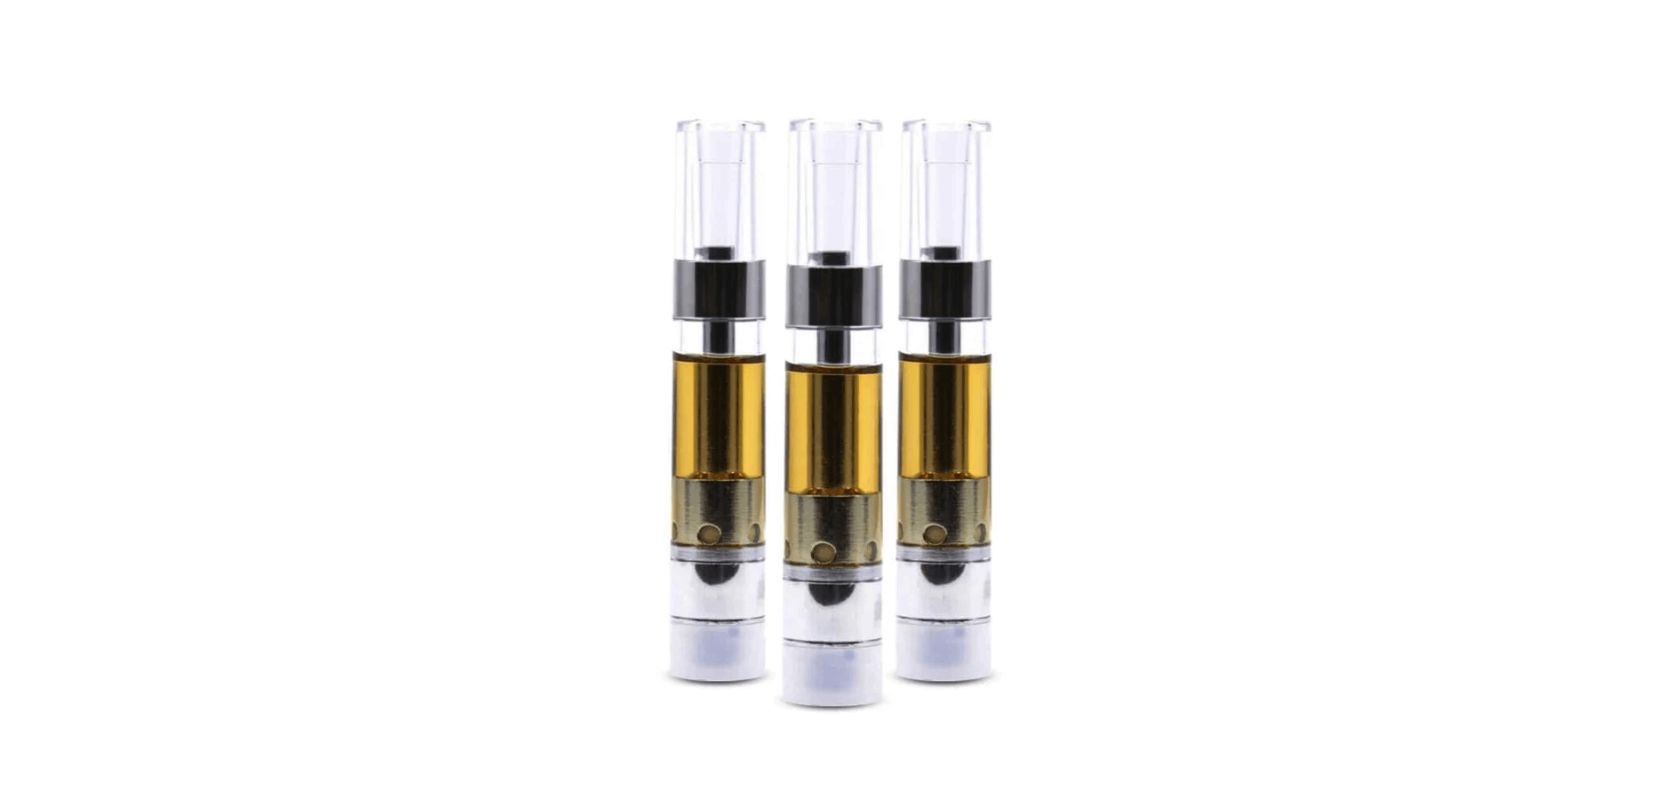 THC cartridges are designed to be enjoyed with a compatible vaporizer or a "vape pen", which heats the oil to produce a delicious, effective, inhalable vapour.